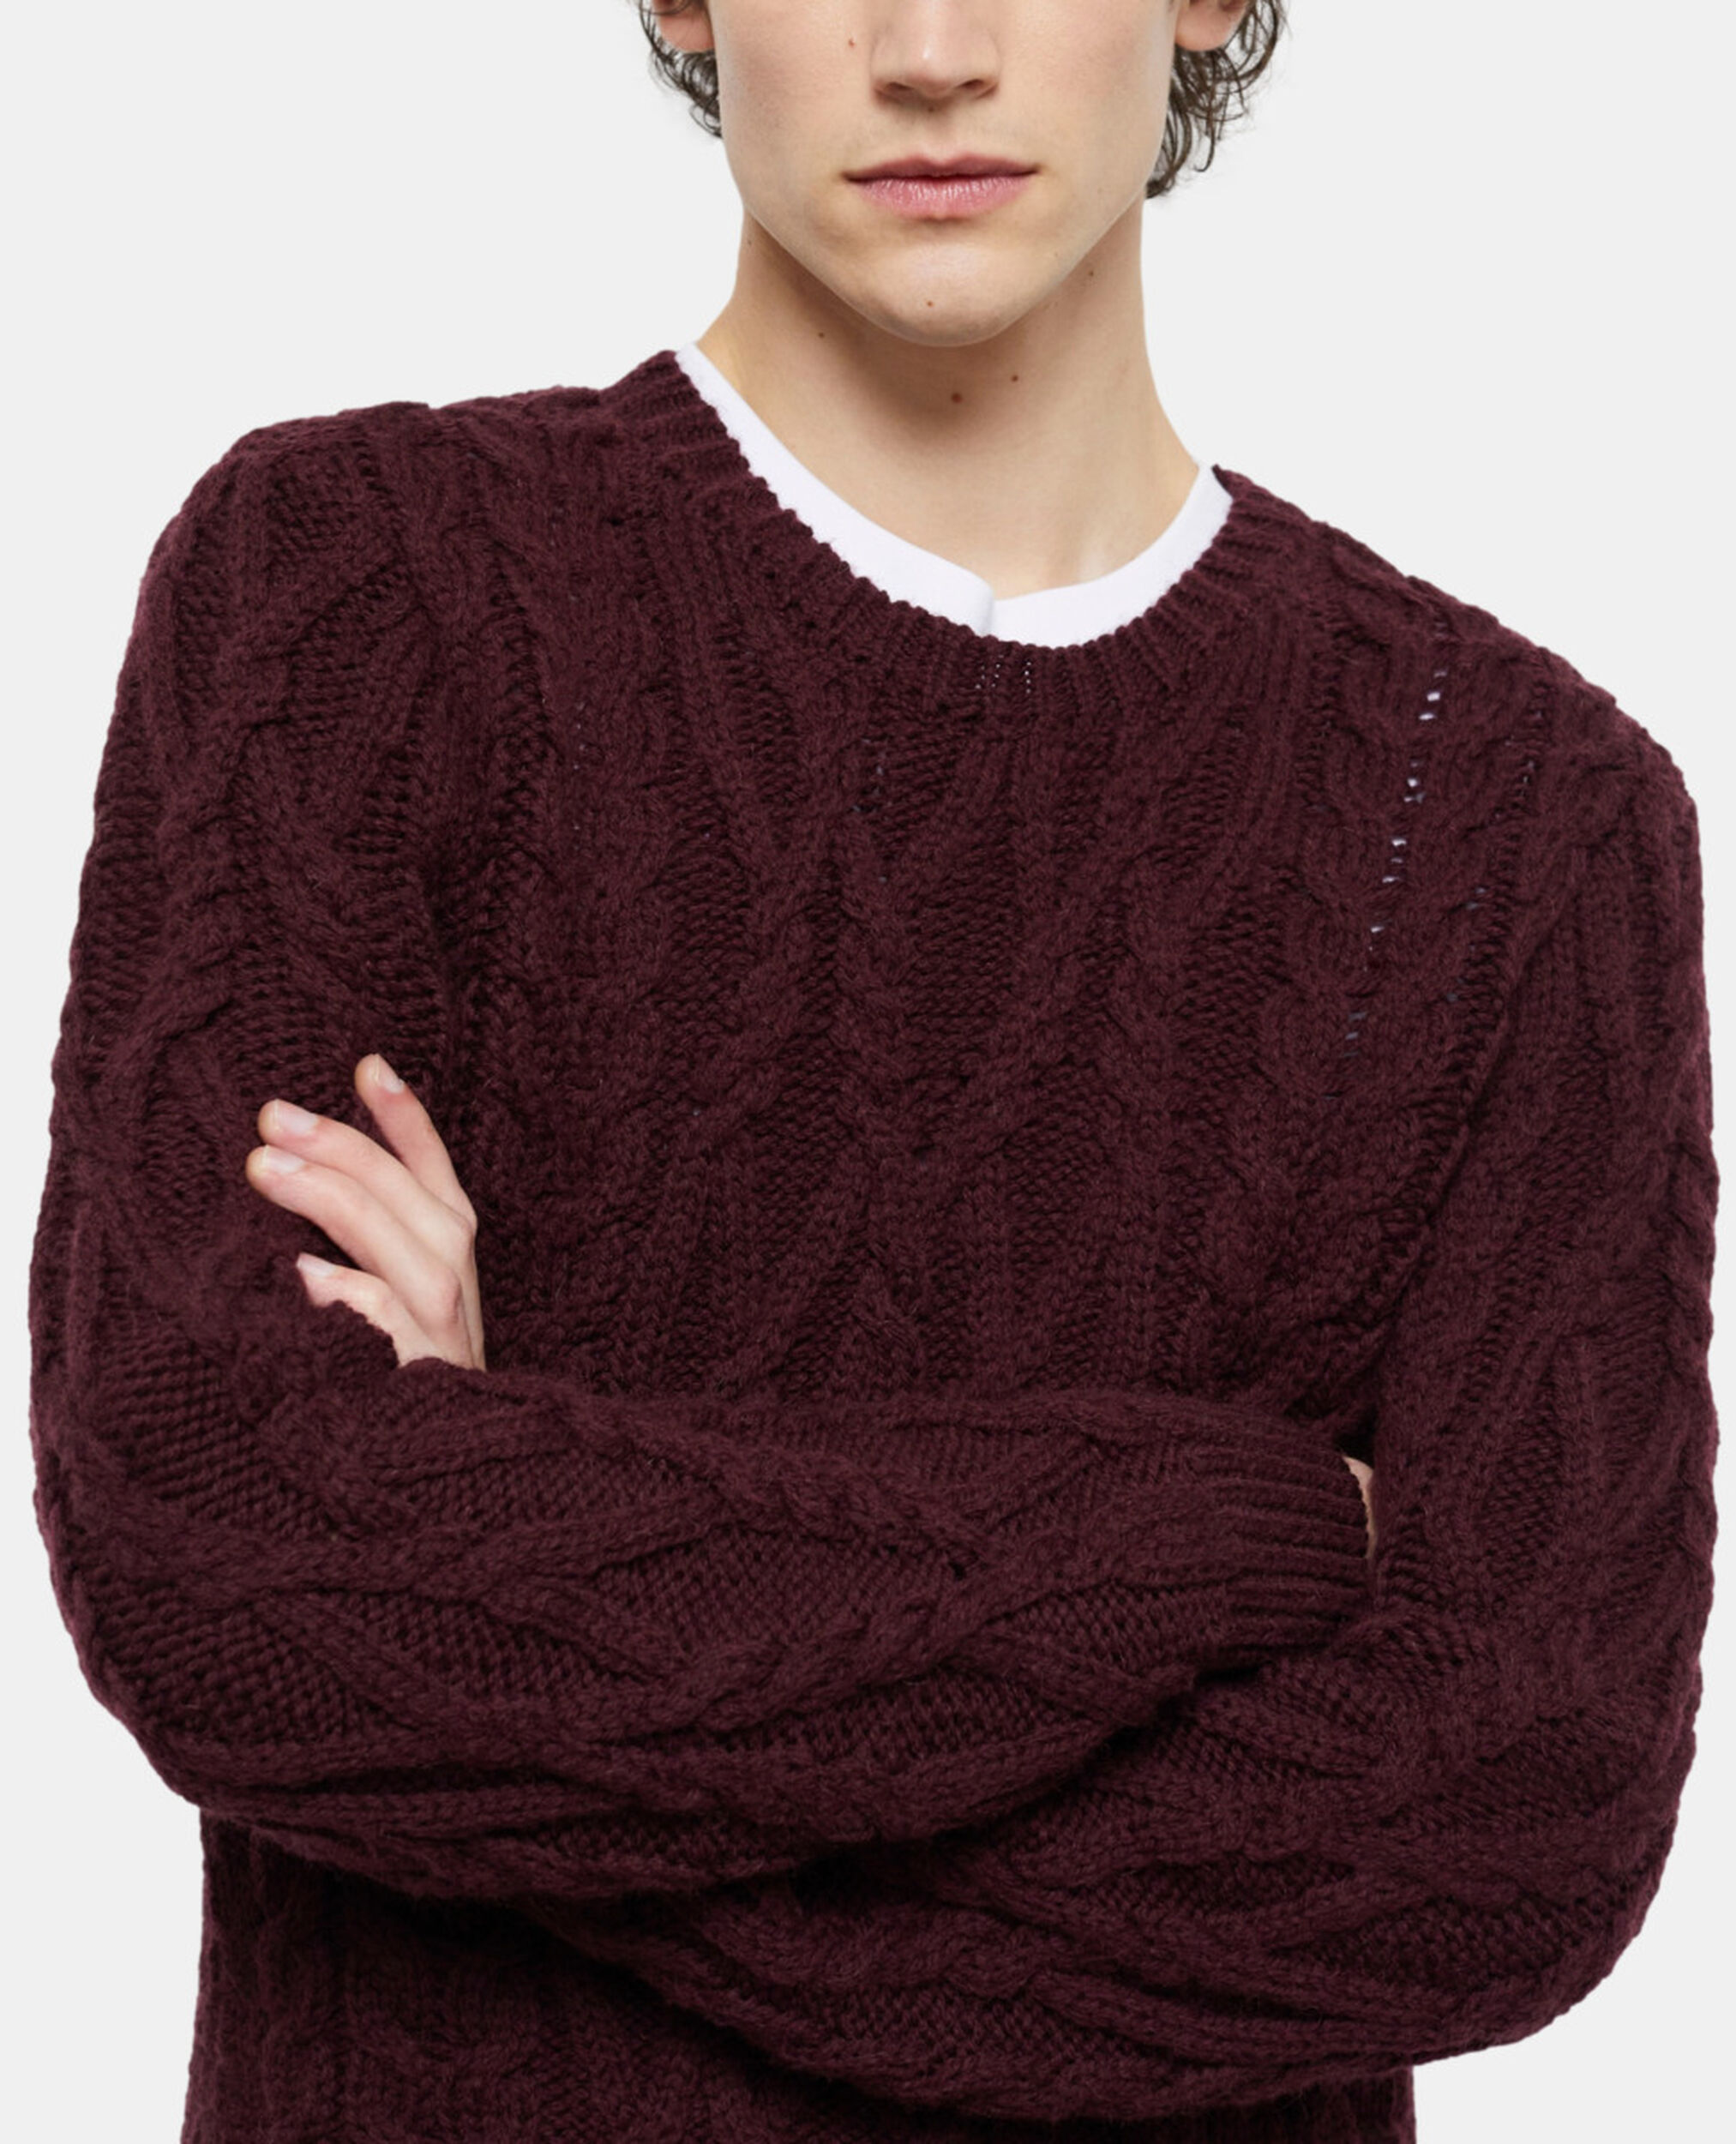 Red wool sweater, BURGUNDY, hi-res image number null